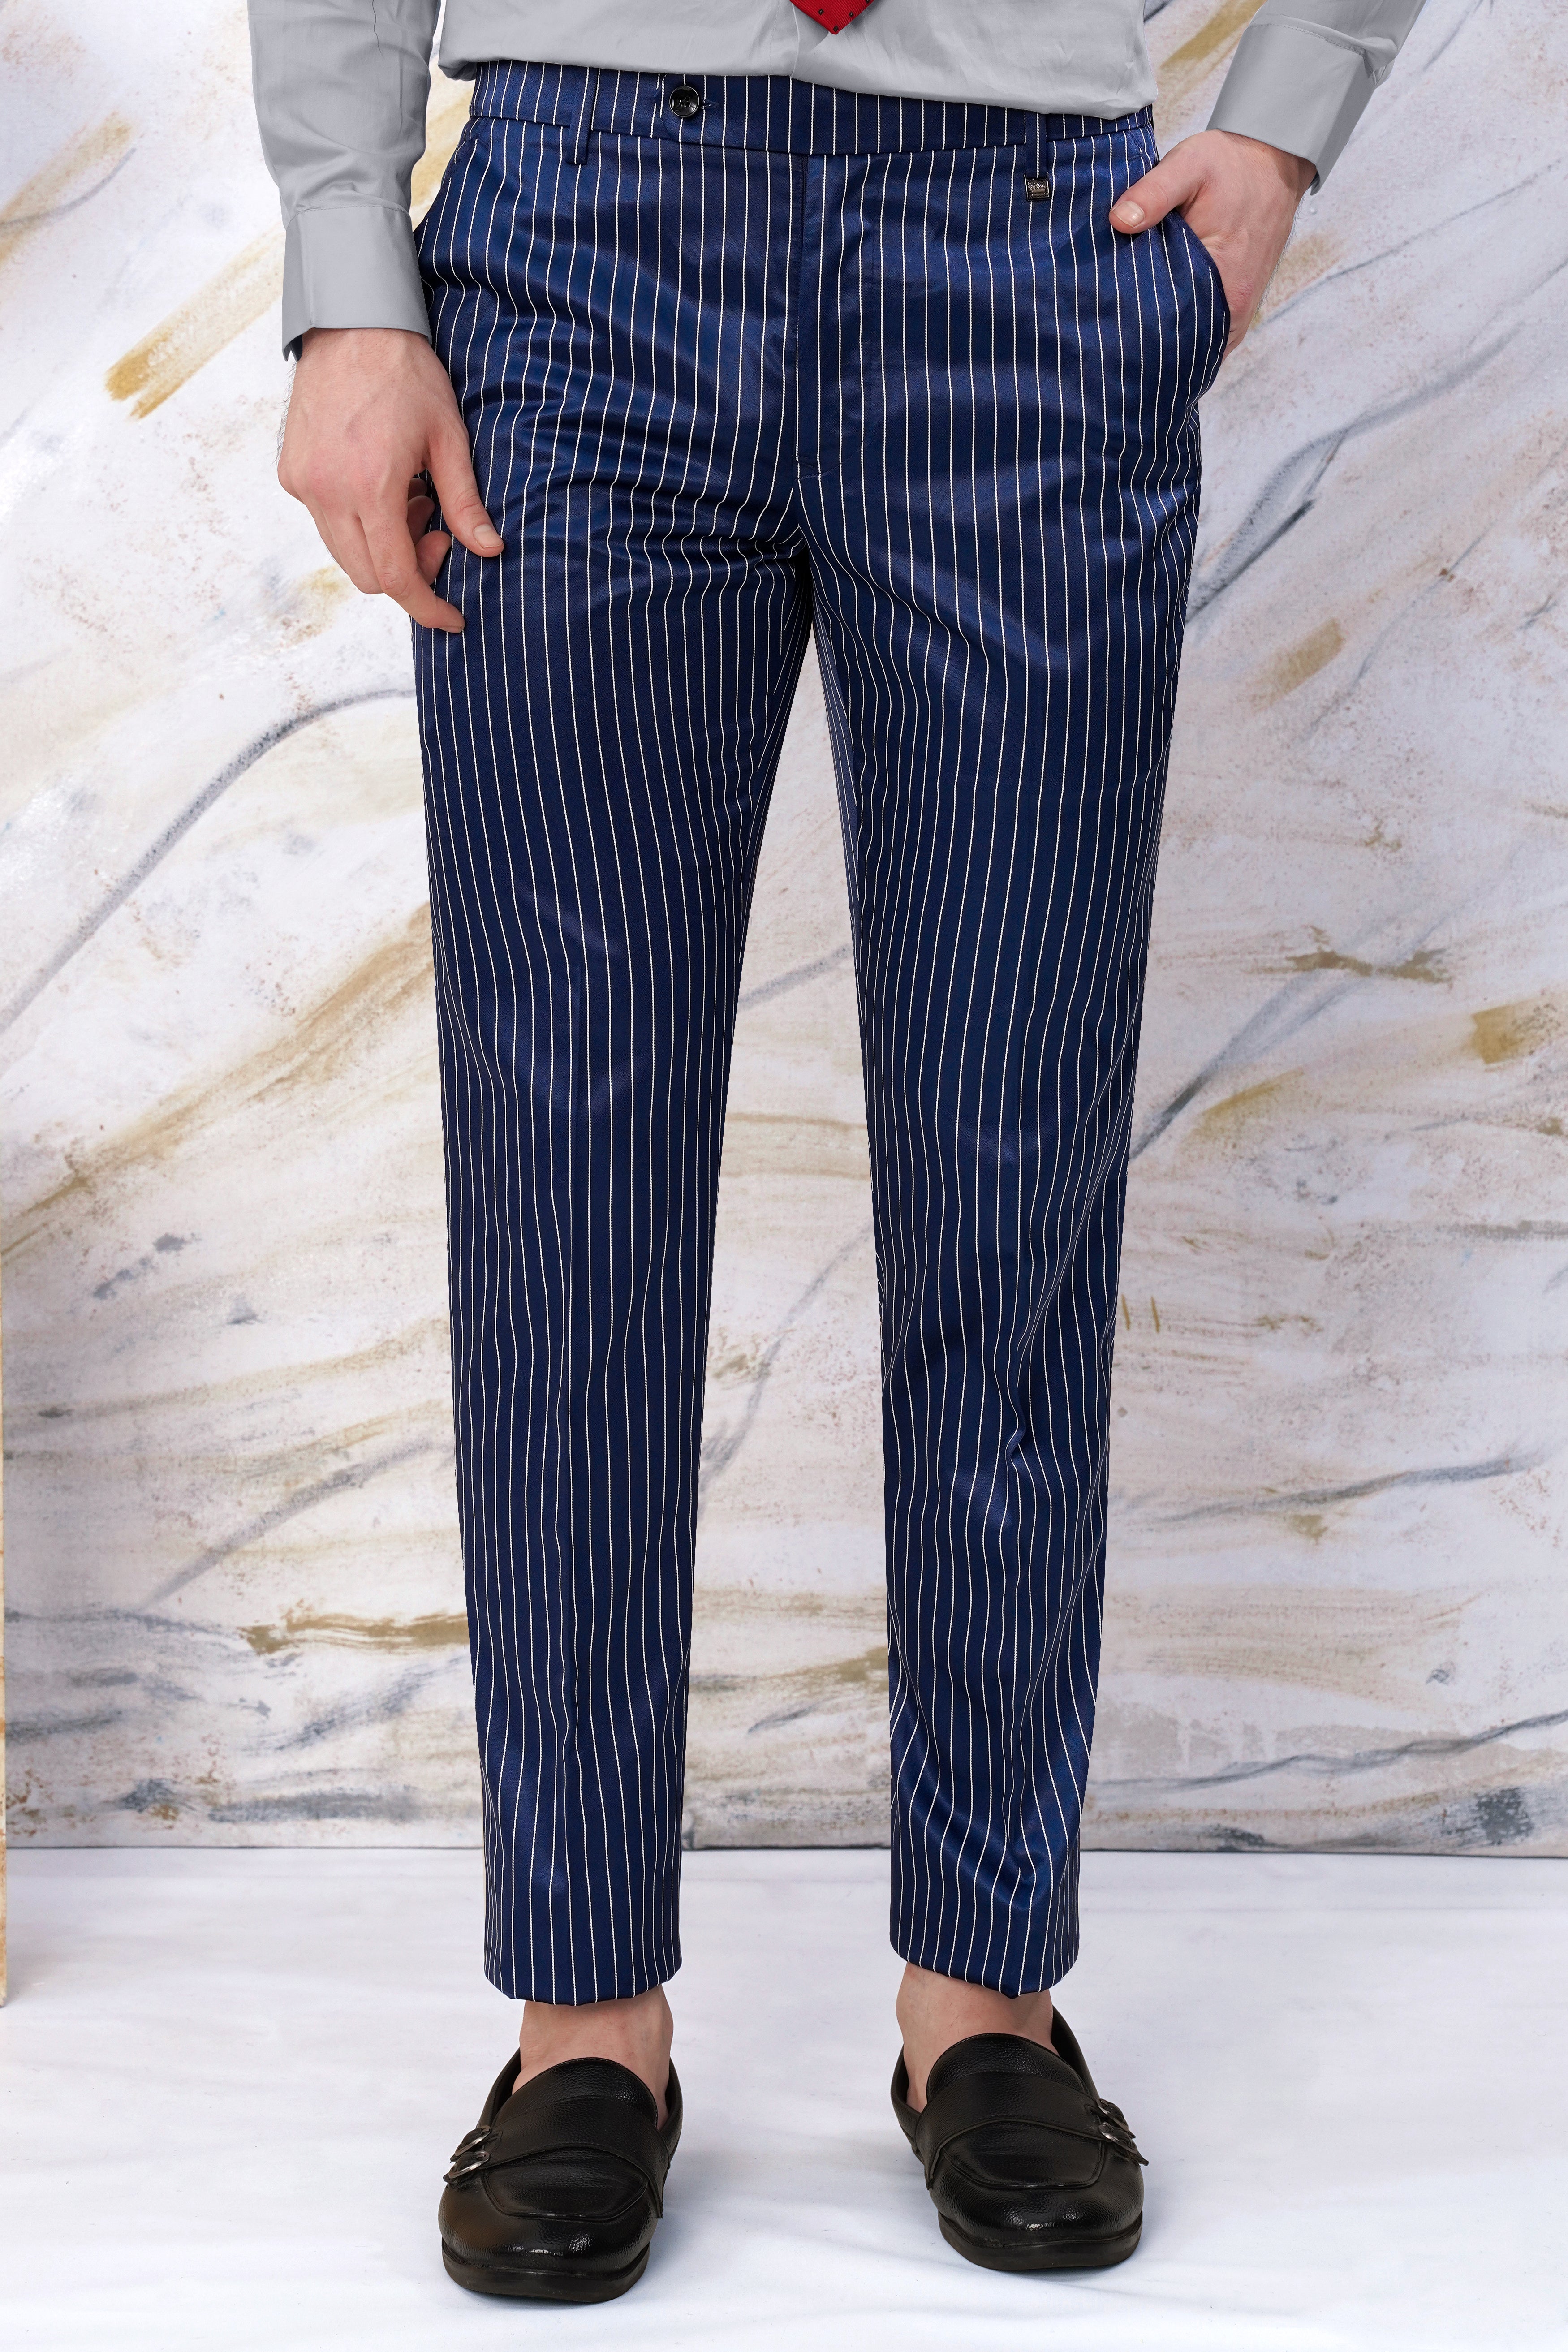 Cinder Blue and White Striped Wool Rich Stretchable Waistband Pant